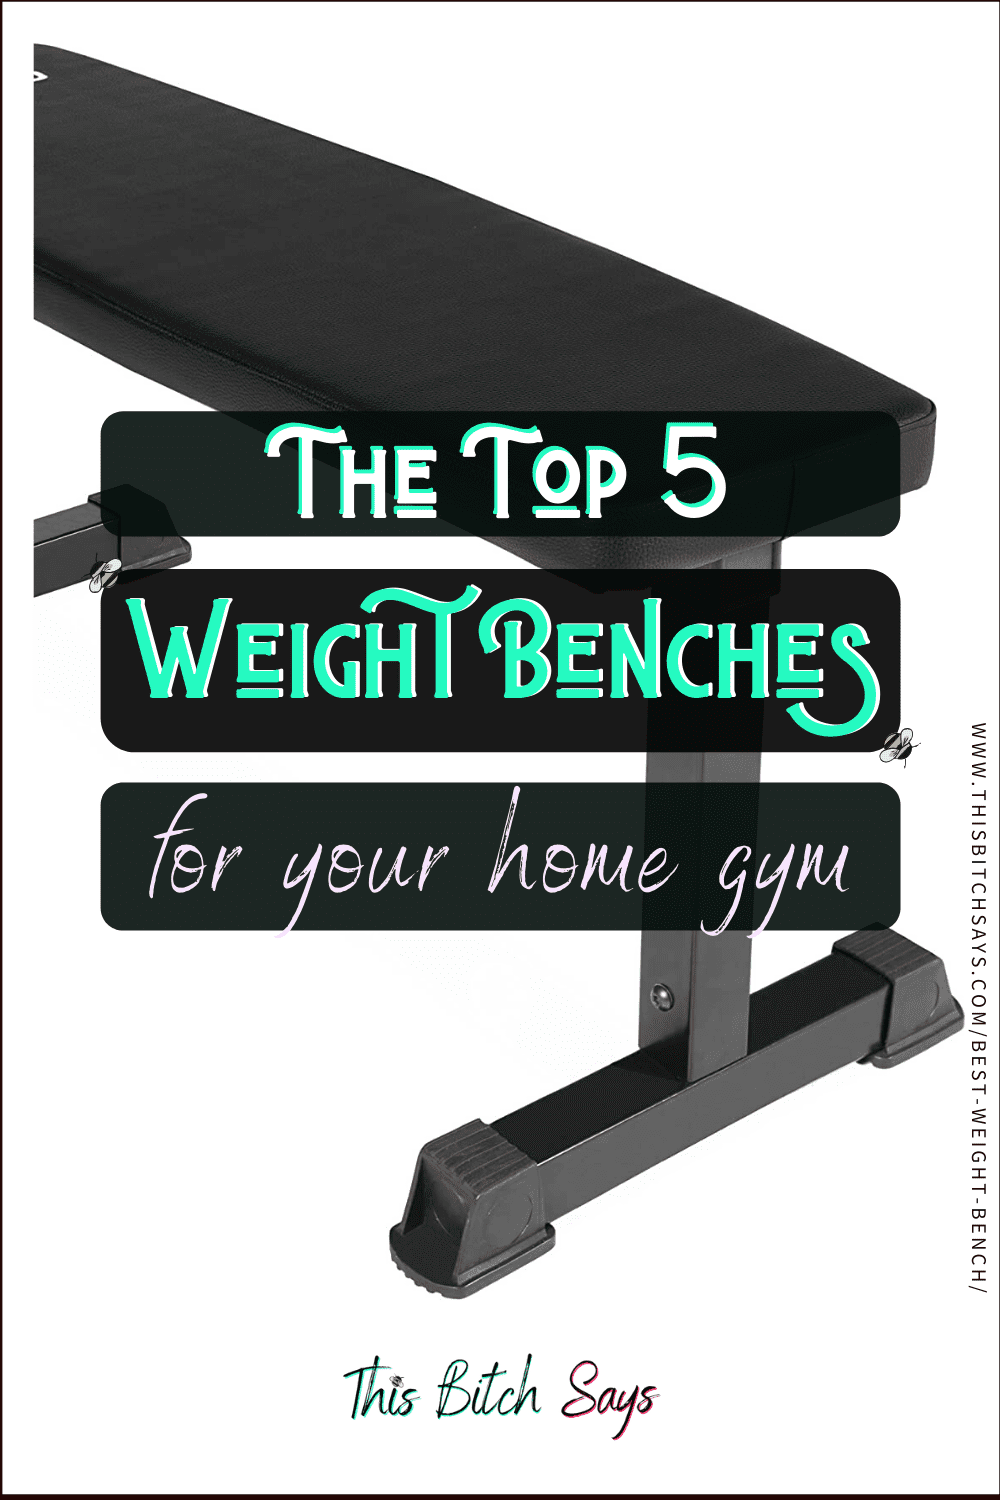 For Your Home: The Top 5 weight benches for your home gym.